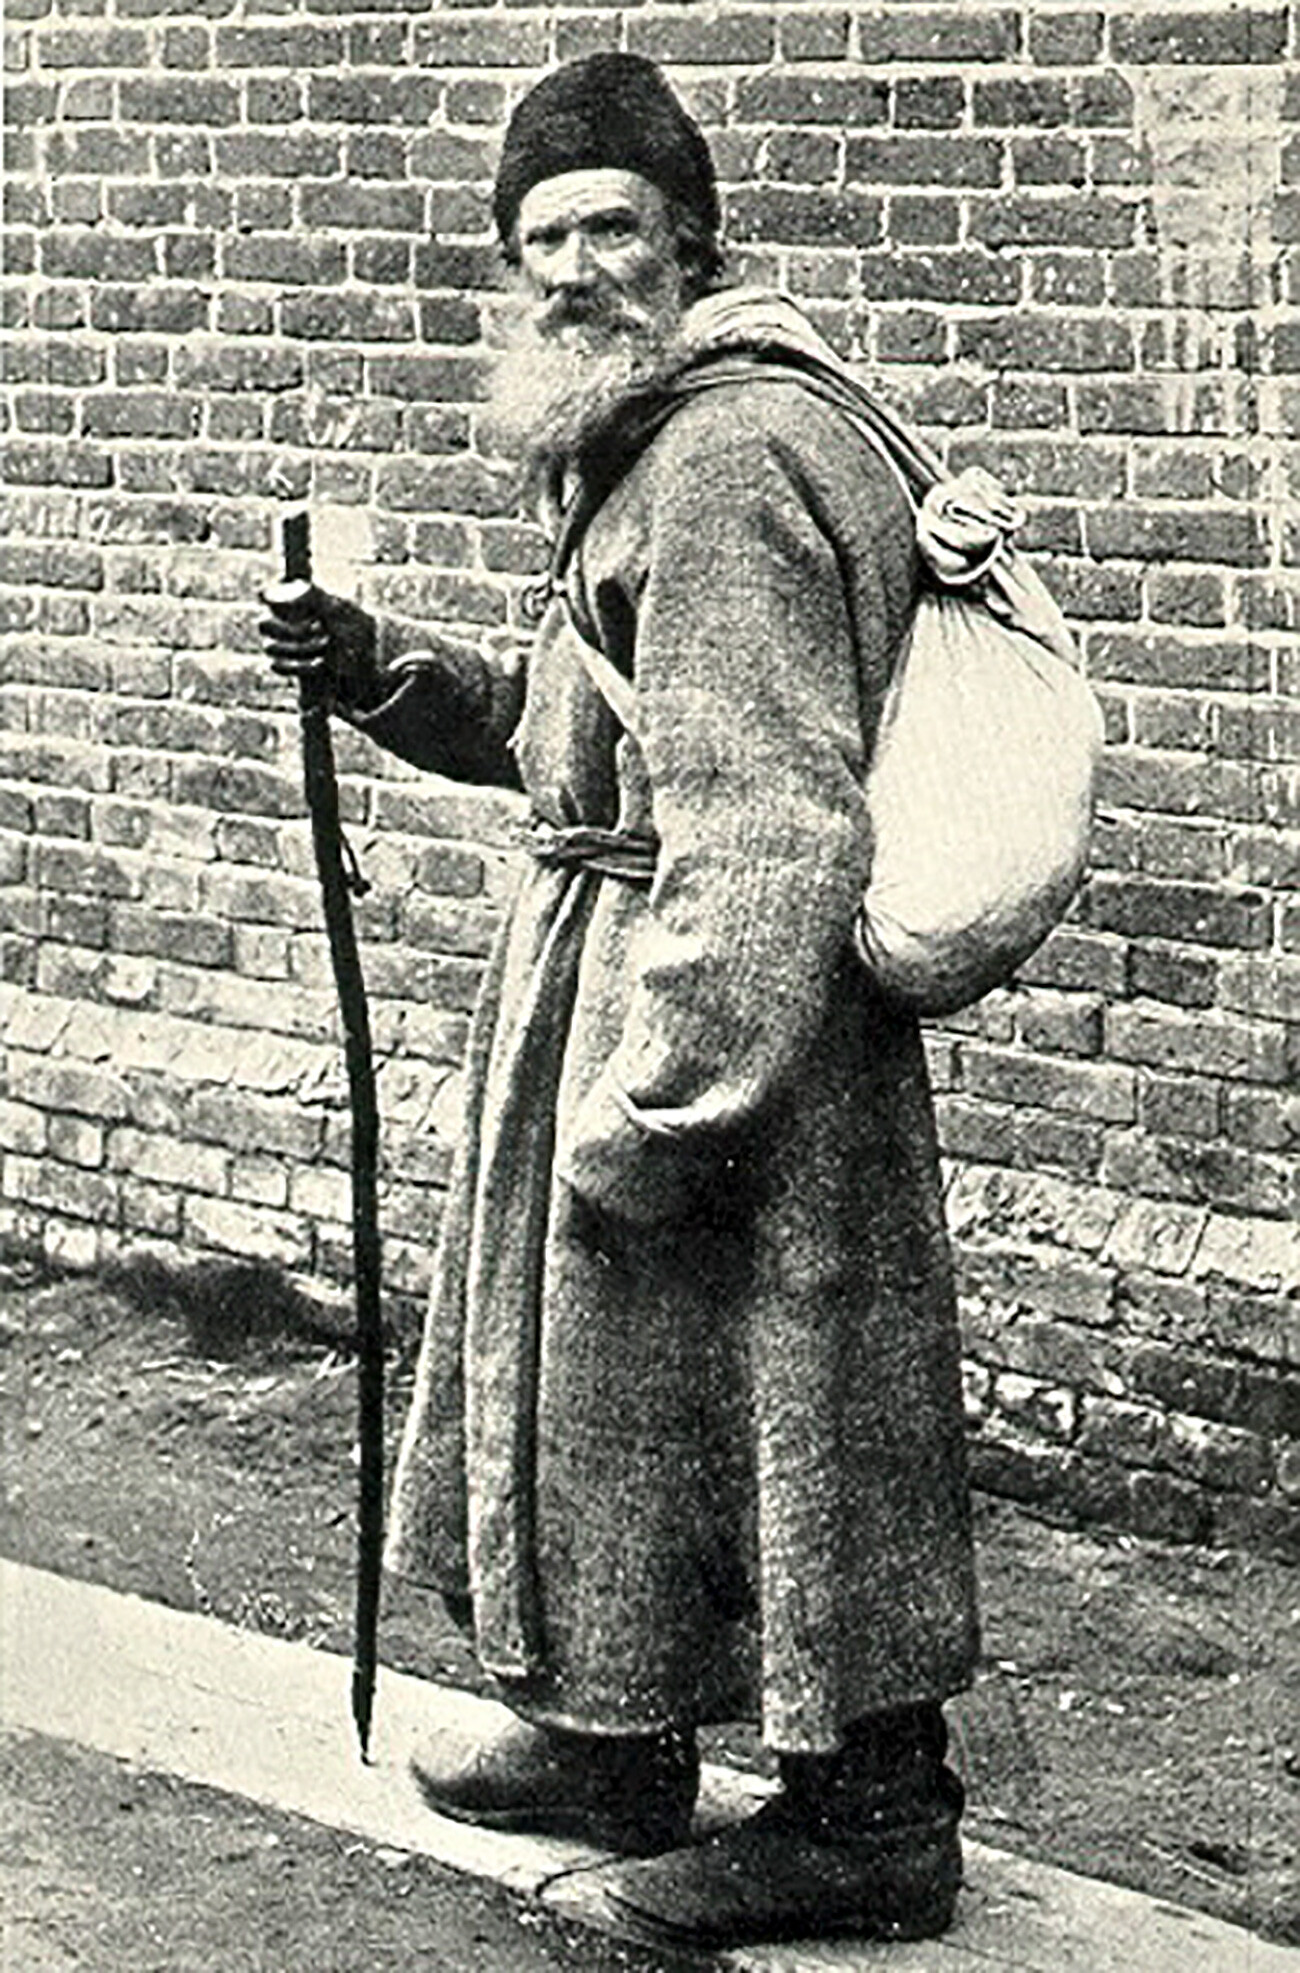 Leo Tolstoy on his walk from Moscow to Yasnaya Polyana